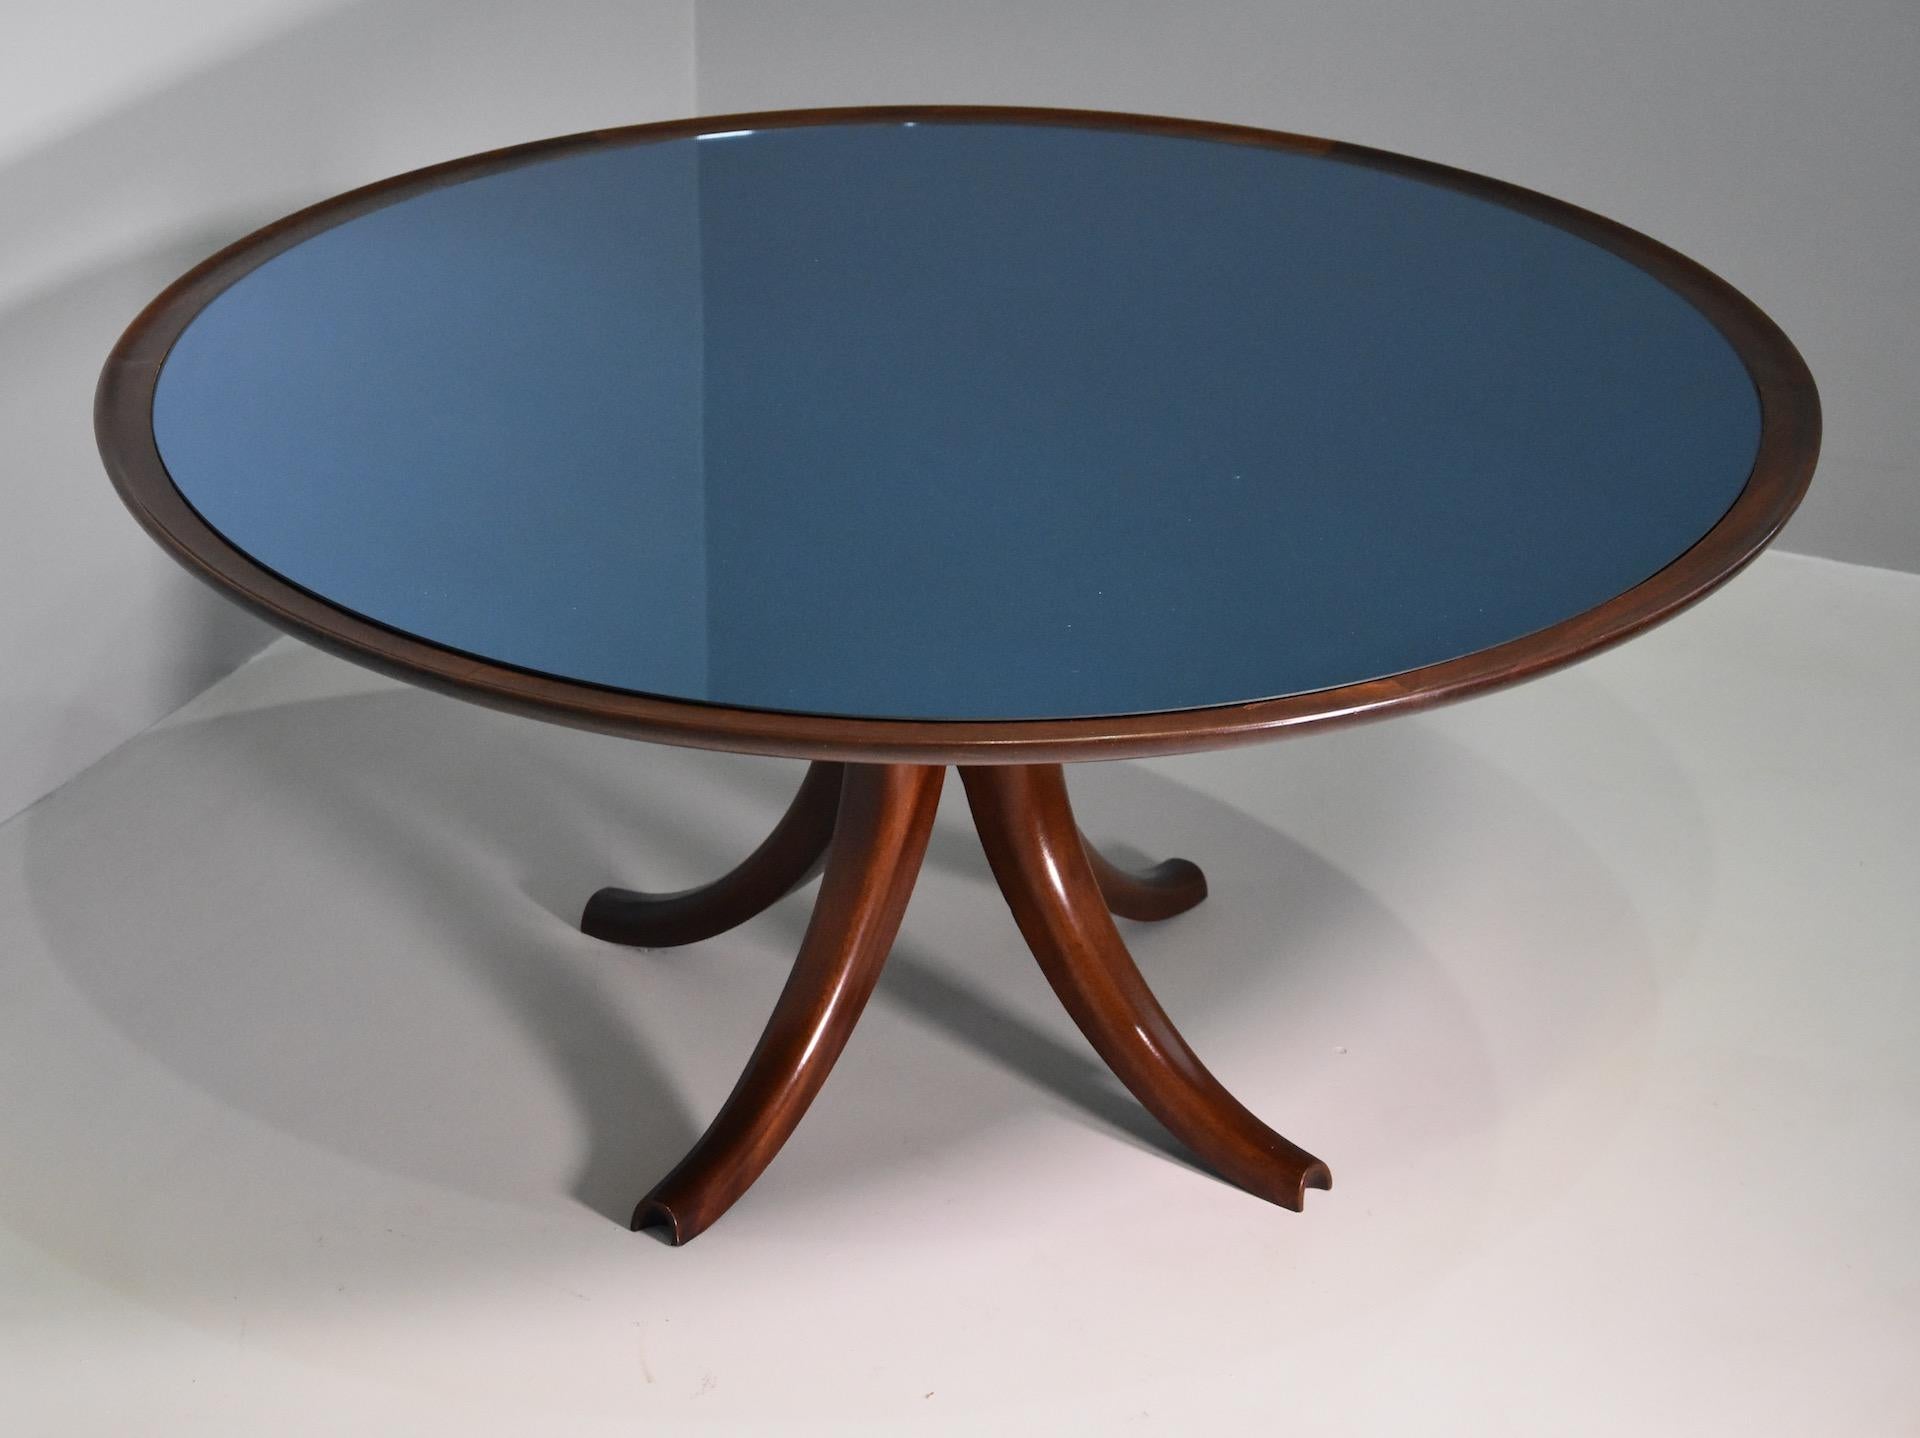 Rare Variant of Big Table Pietro Chiesa for Fontana Arte 1940 Whit Blue Mirror For Sale 7